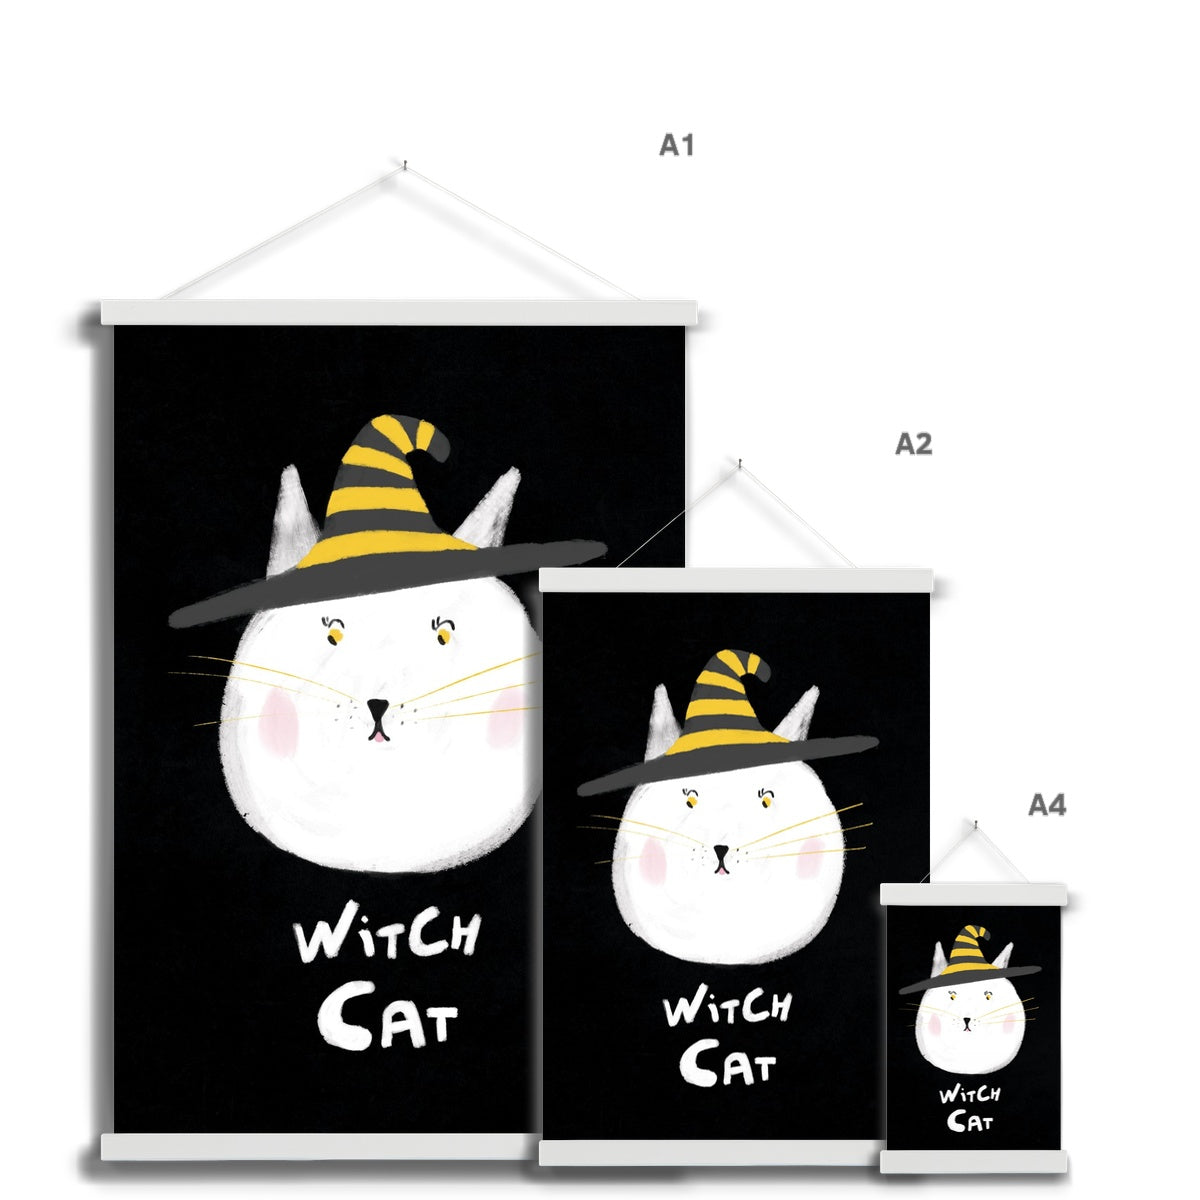 Witch Cat Print Fine Art Print with Hanger